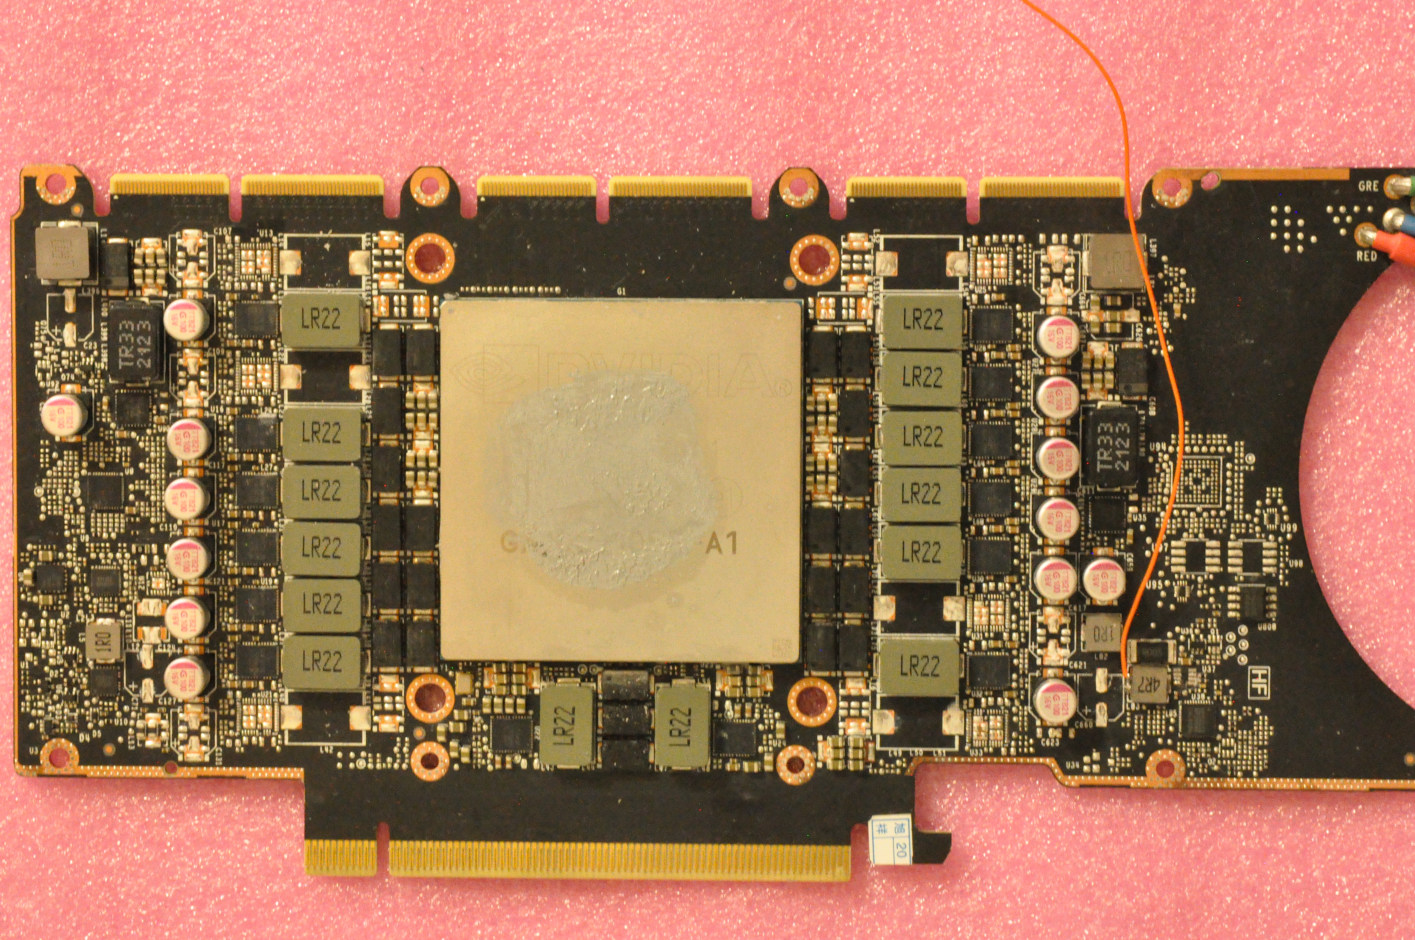 Front side of the bare PCB